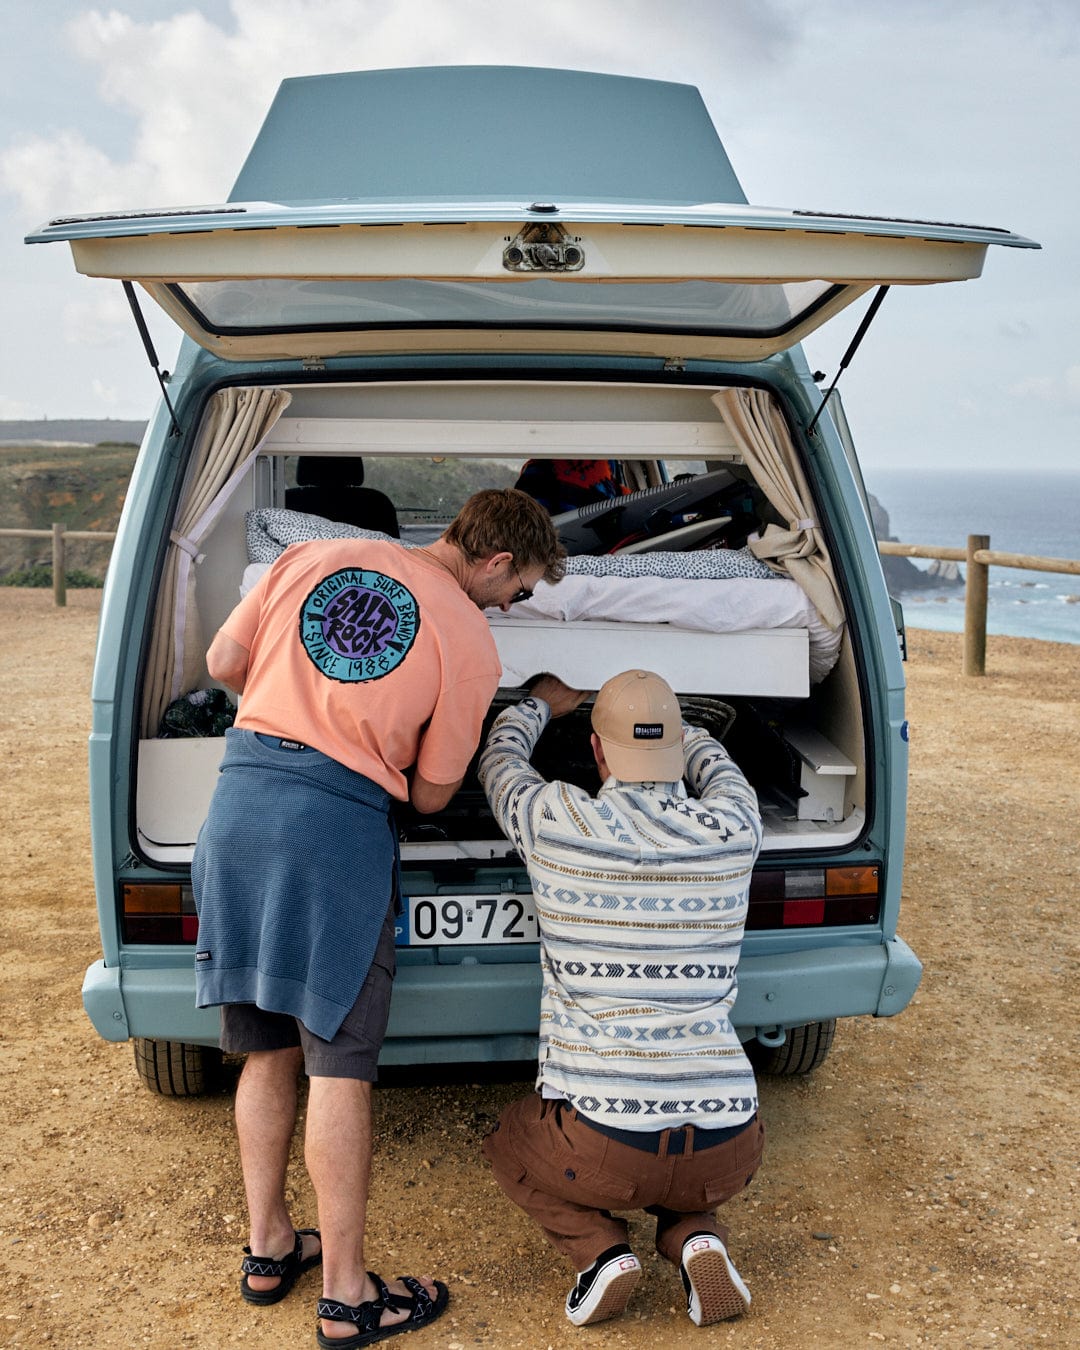 Two men are opening the trunk of a blue van made with Asher - Mens Jacquard Shirt - Cream by Saltrock, which is 100% Cotton.